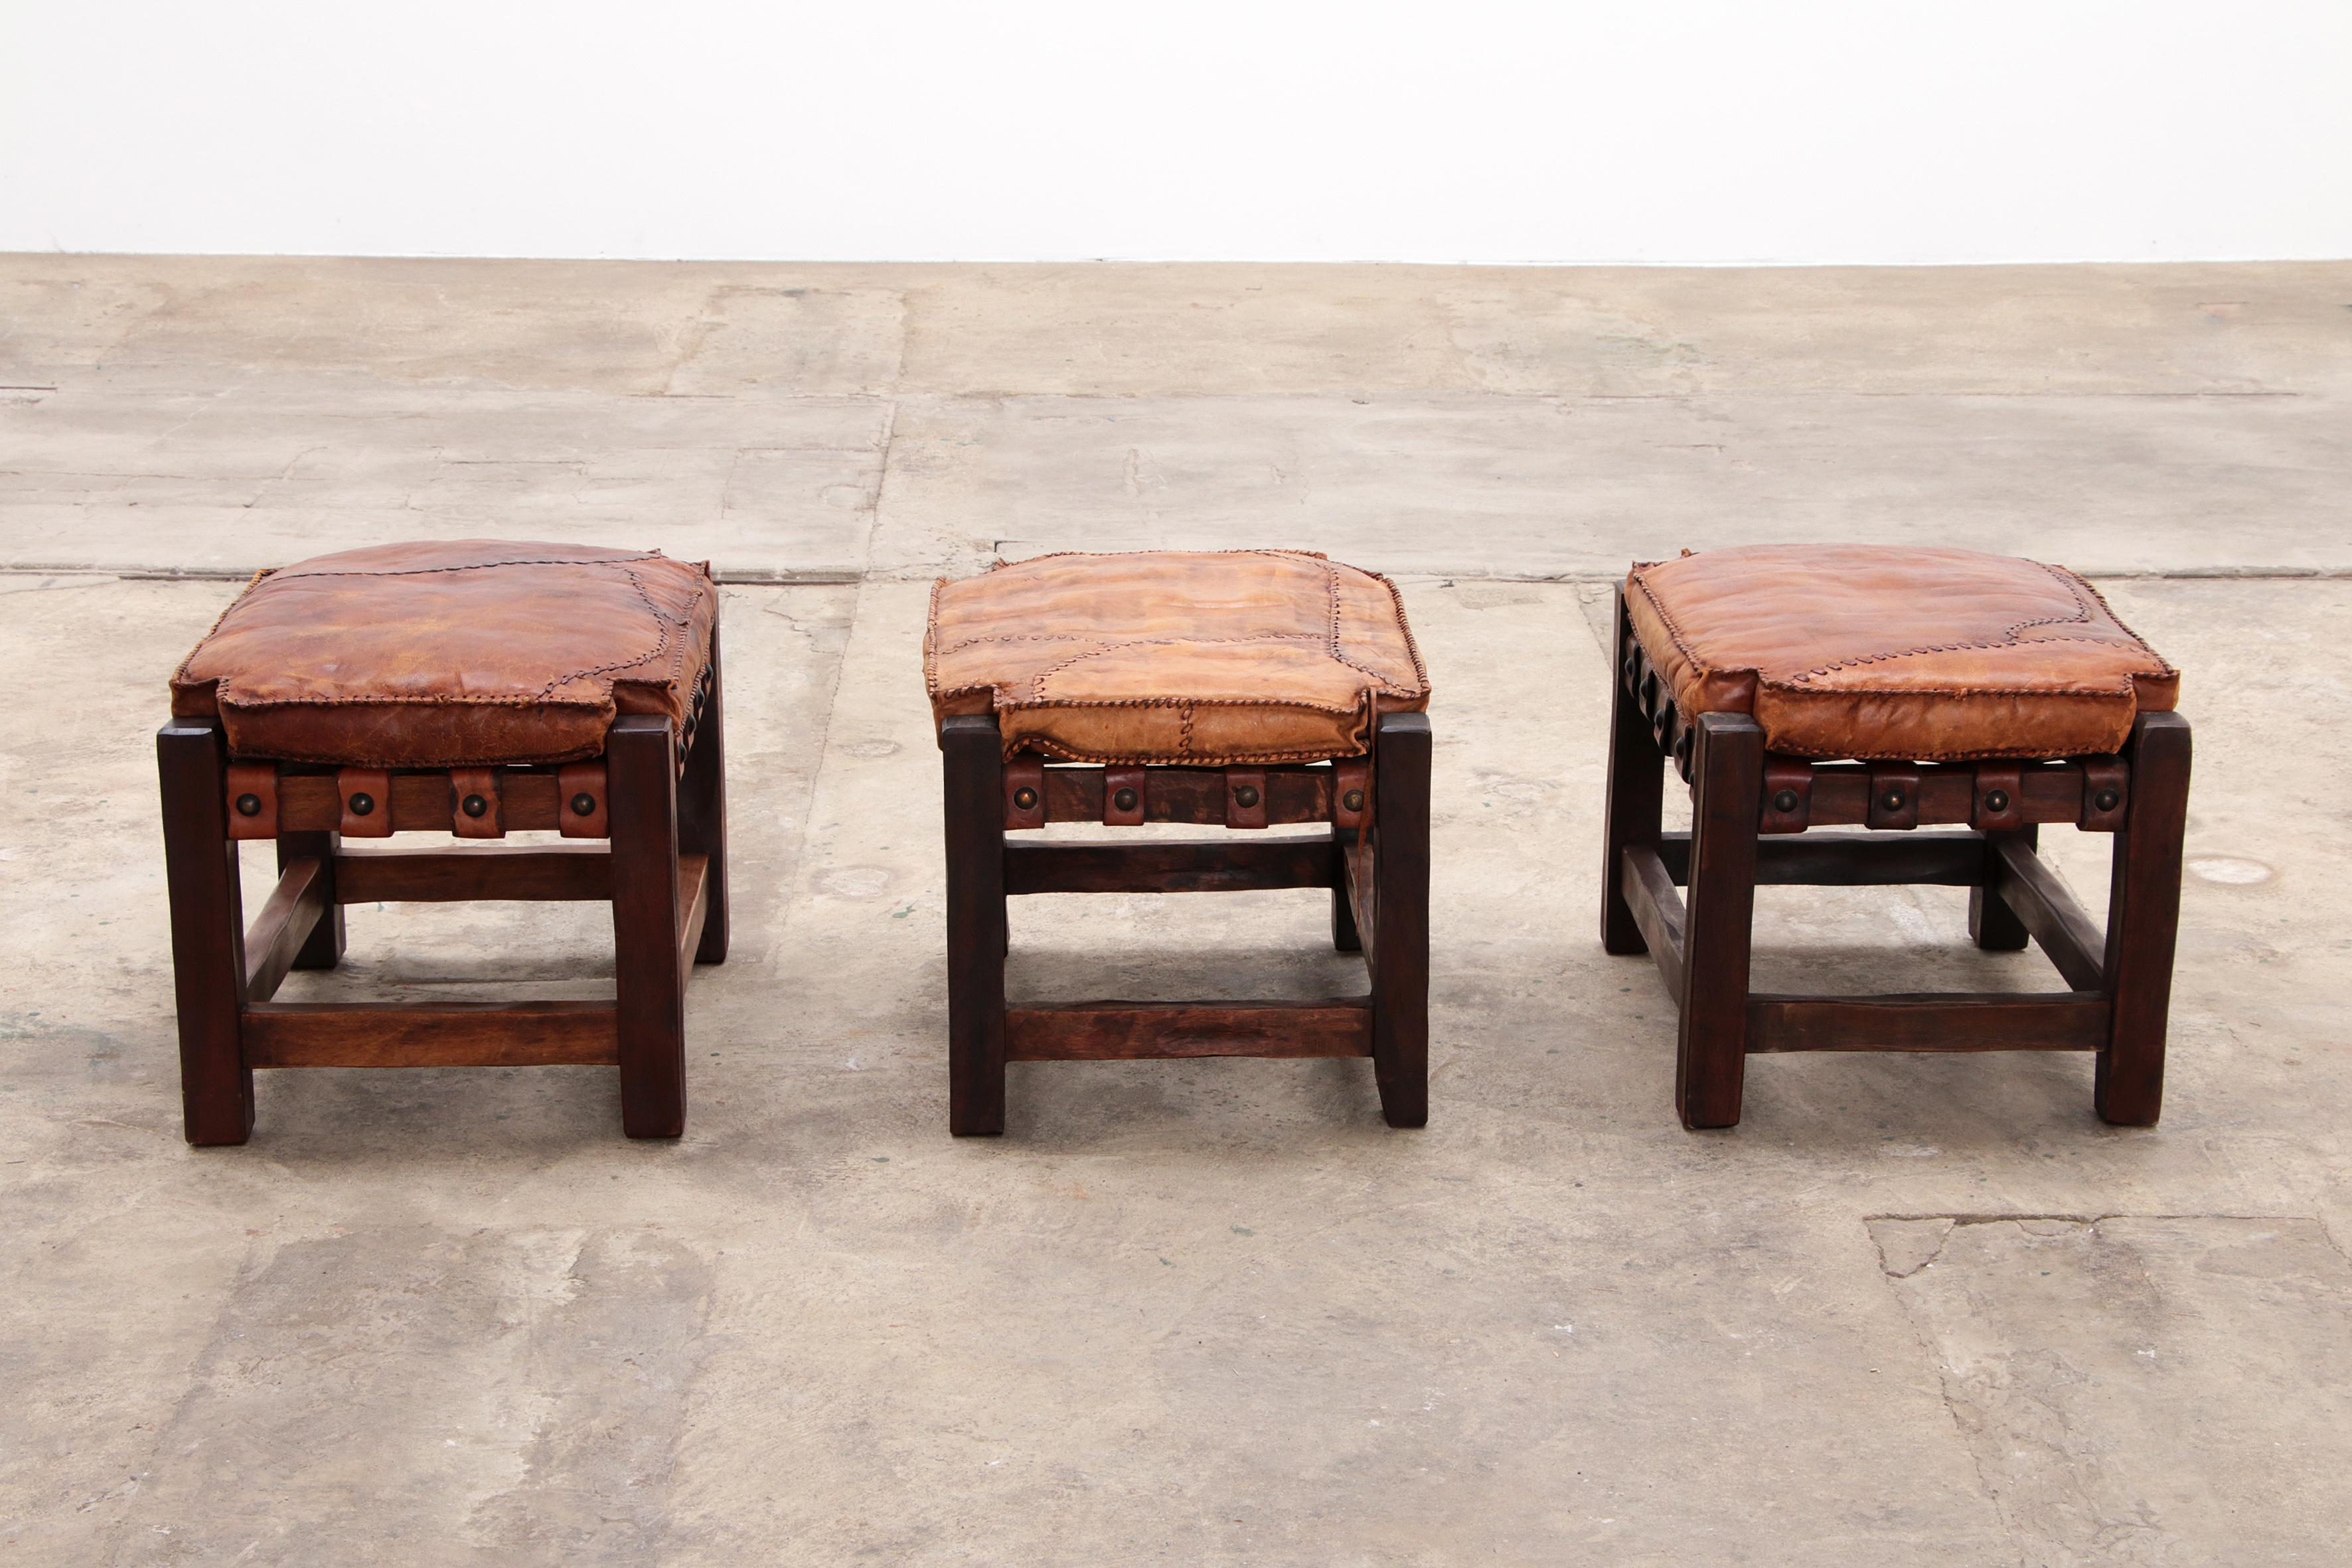 Brazilian Brutalist footstools with patchwork leather, 1960 For Sale 2